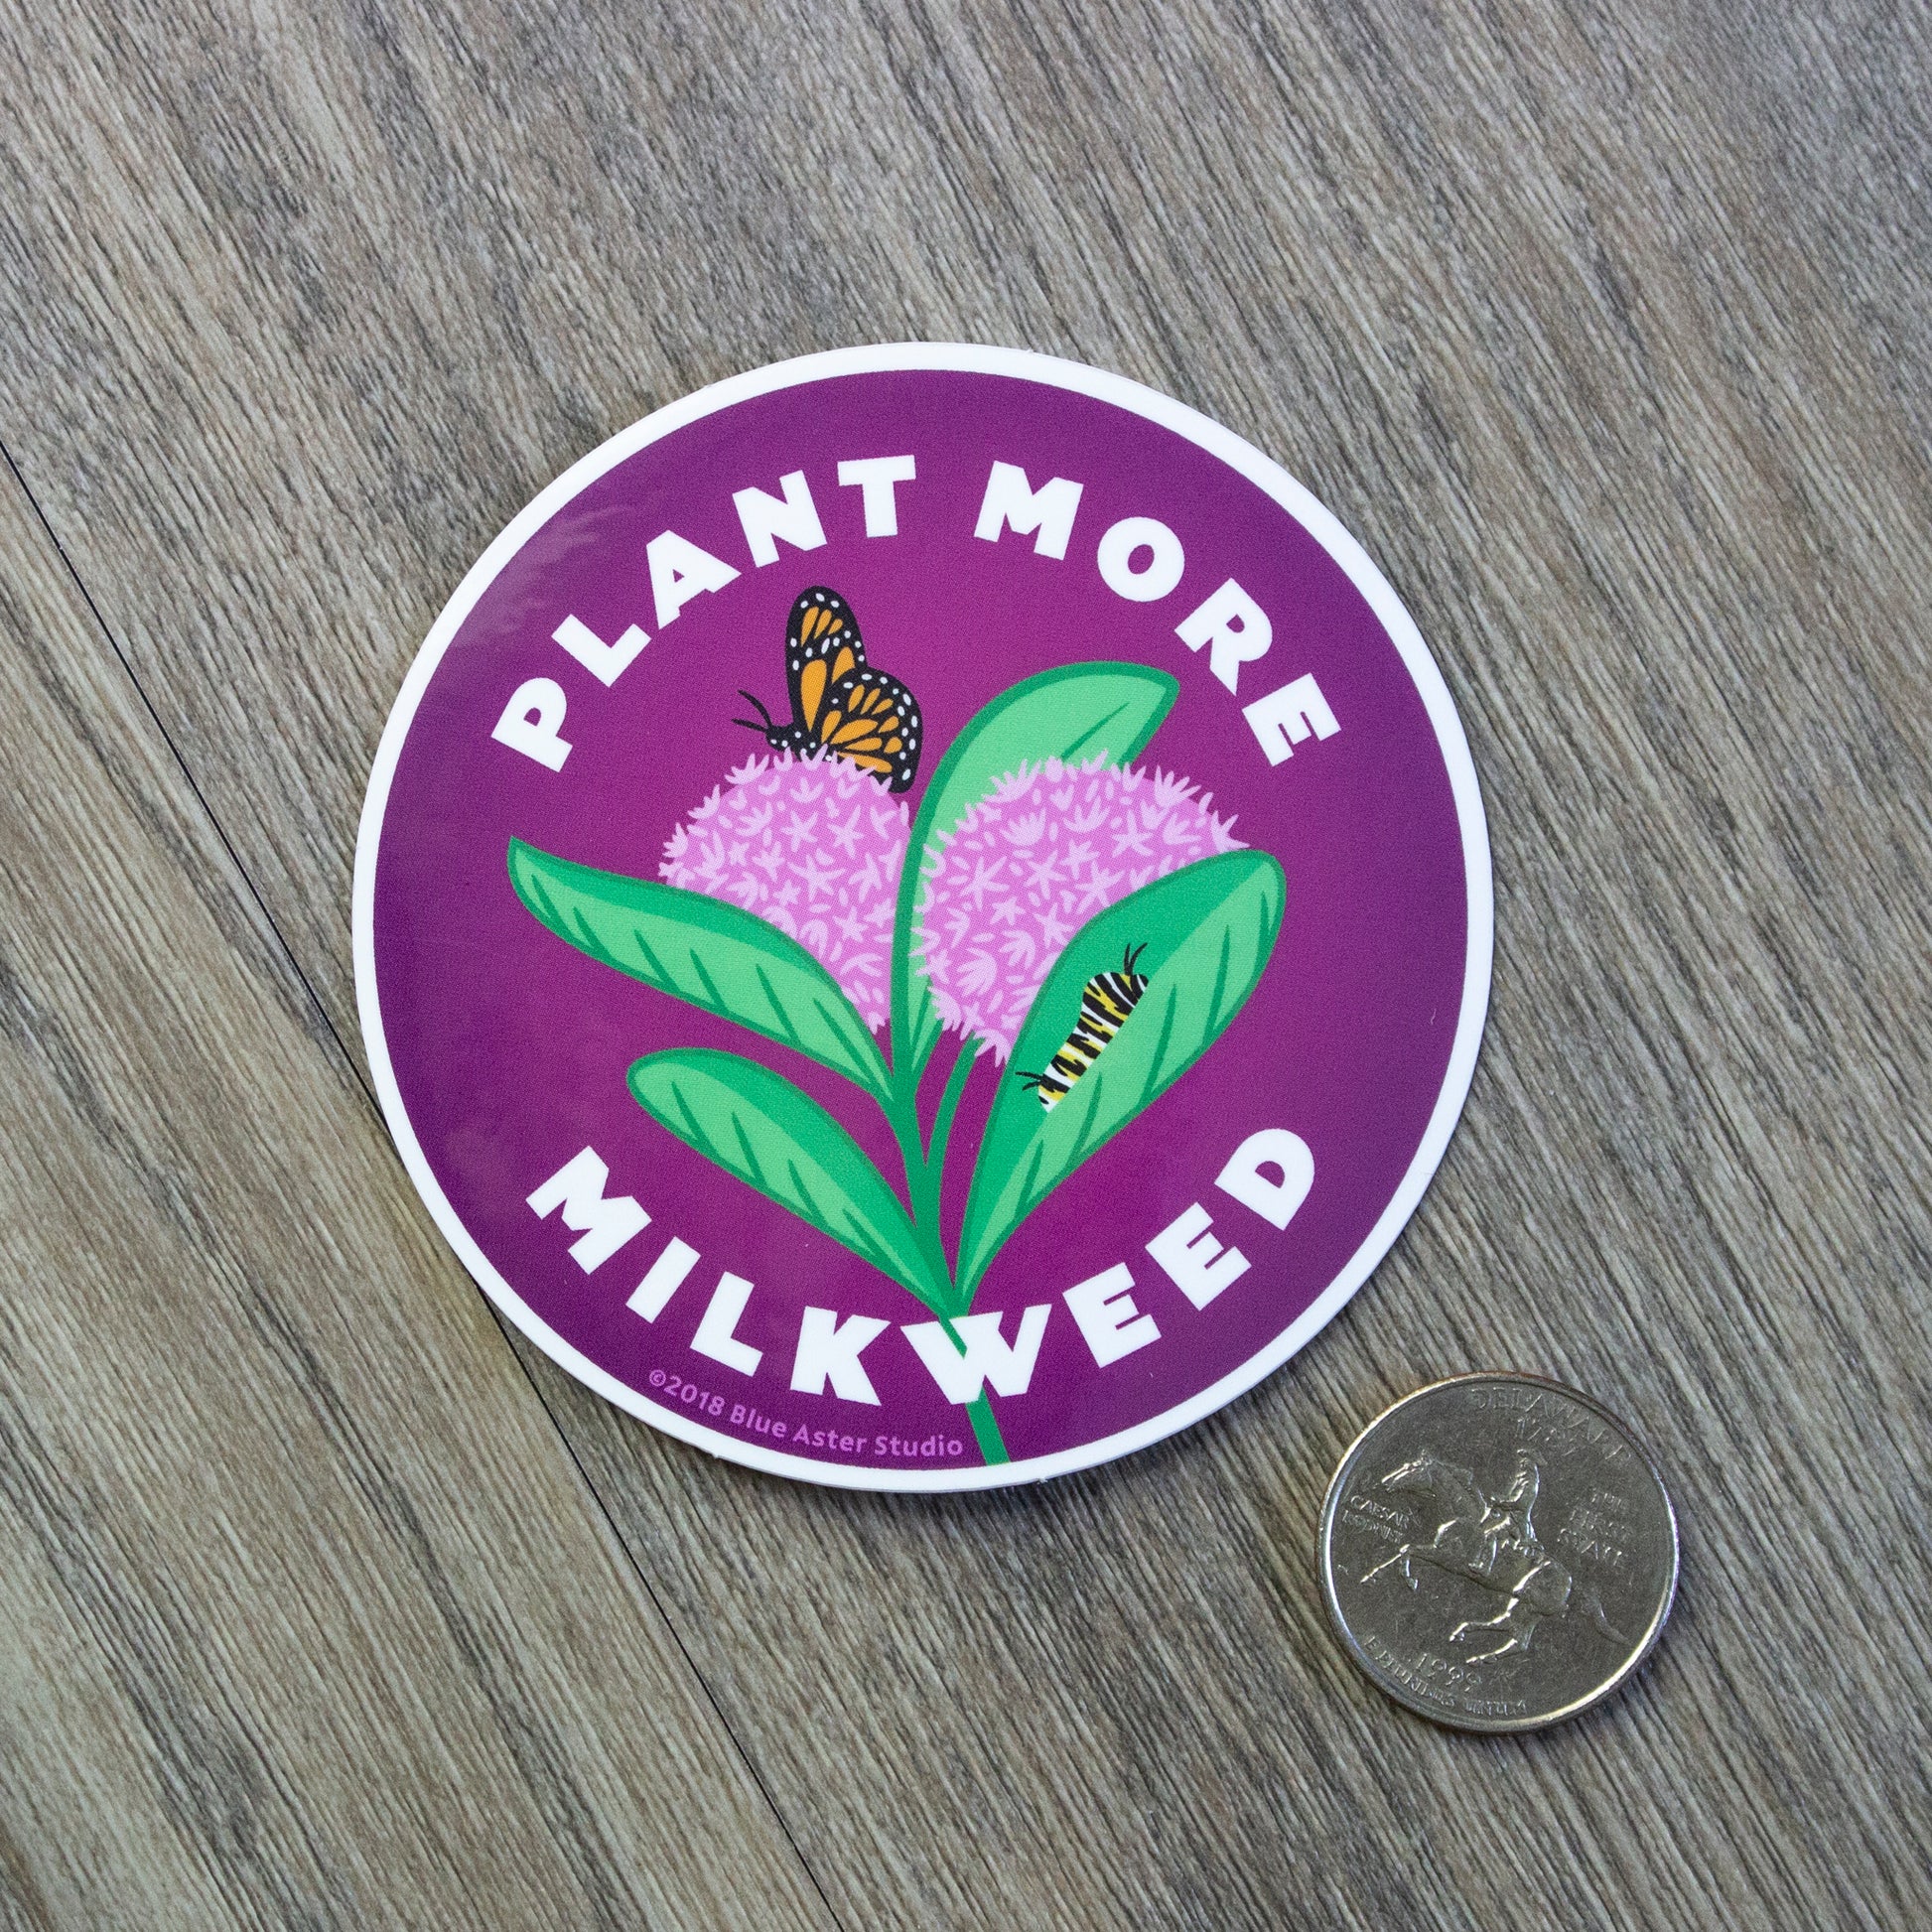 A round vinyl sticker with an illustration of a common milkweed plant in the center and the words Plant More Milkweed around it. The milkweed sticker is sitting next to a USD quarter for scale.